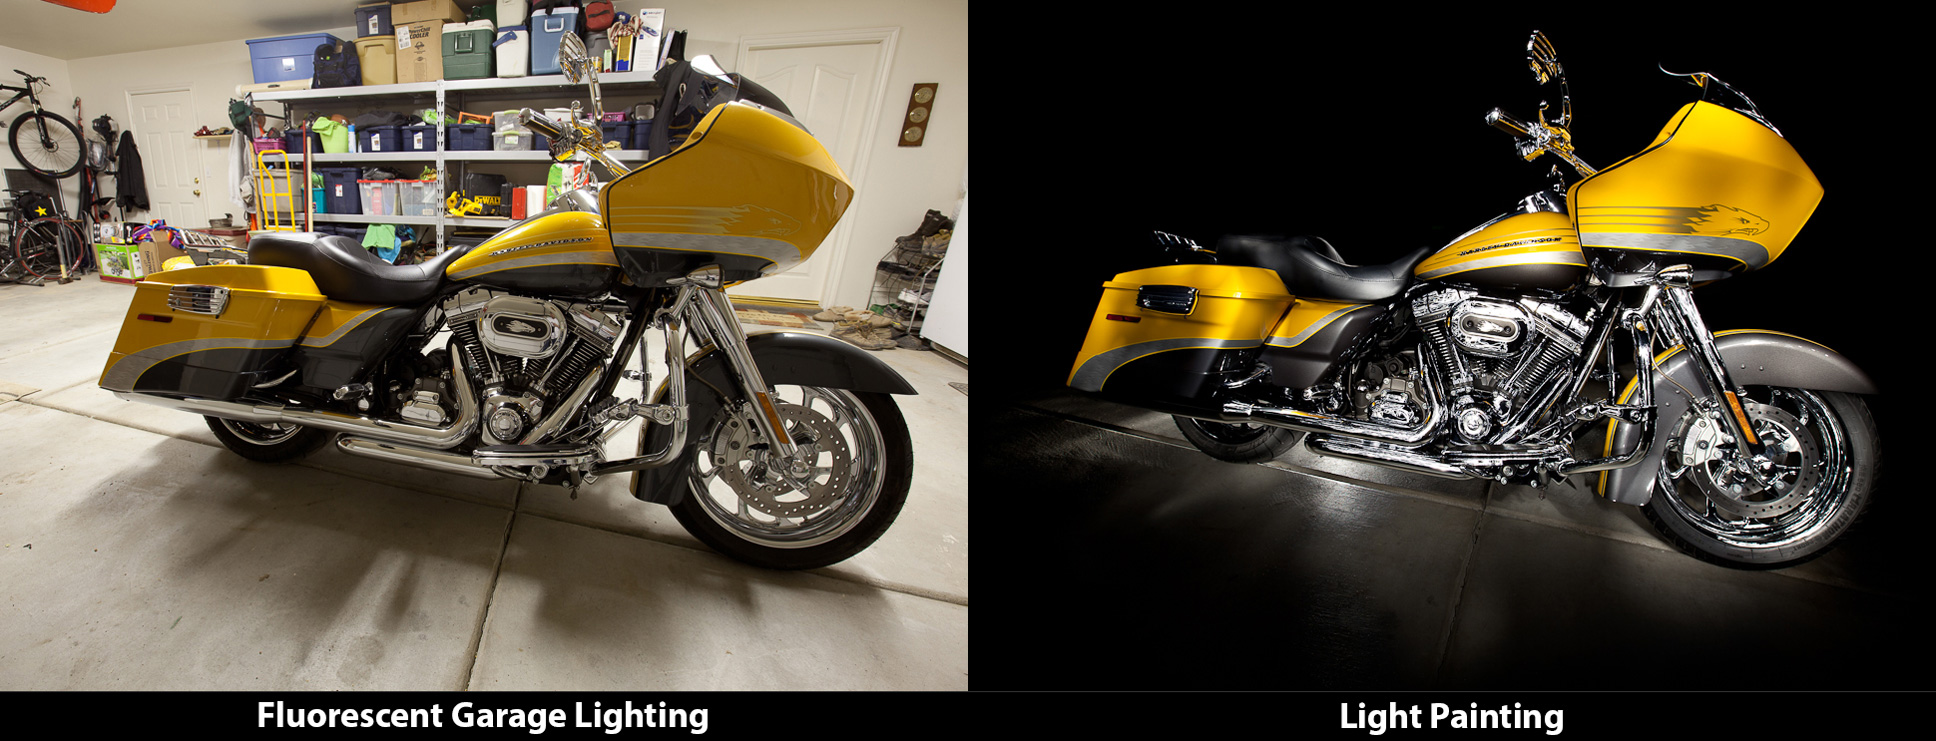 The Light Painting Difference